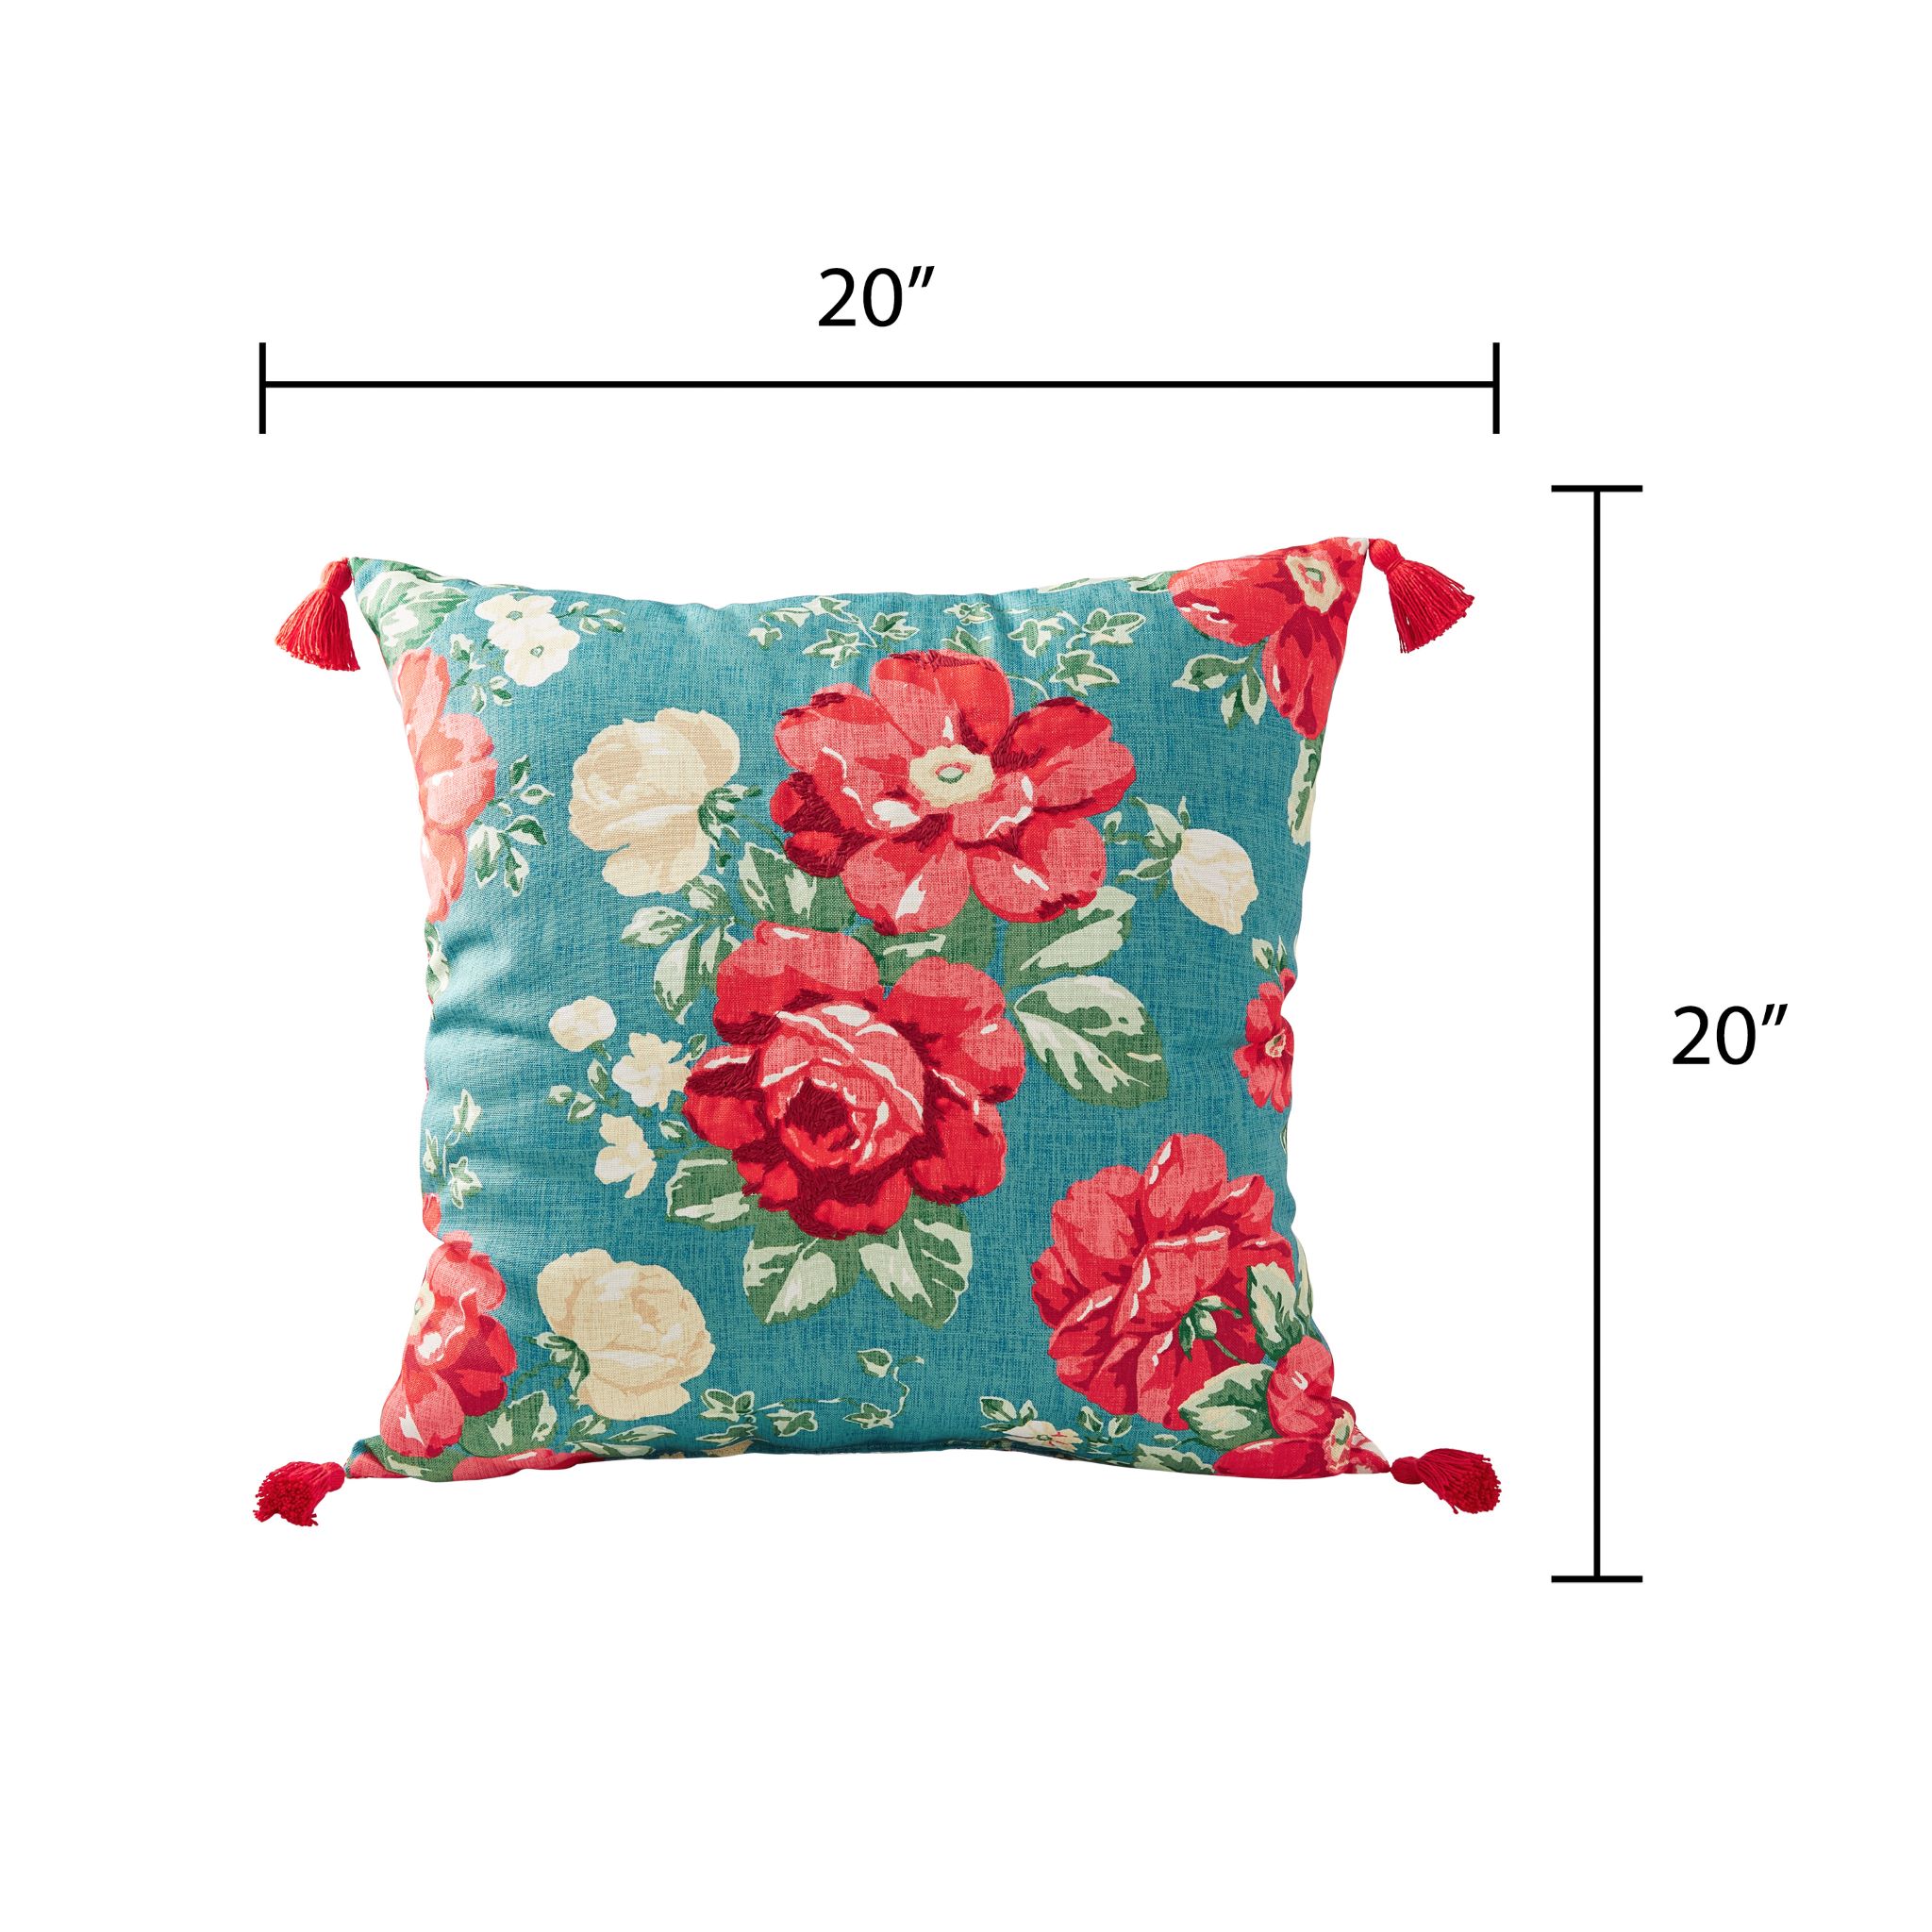 The Pioneer Woman Embr Vint Floral Outdoor Pillow, 20" x 20", Multicolor - image 2 of 9